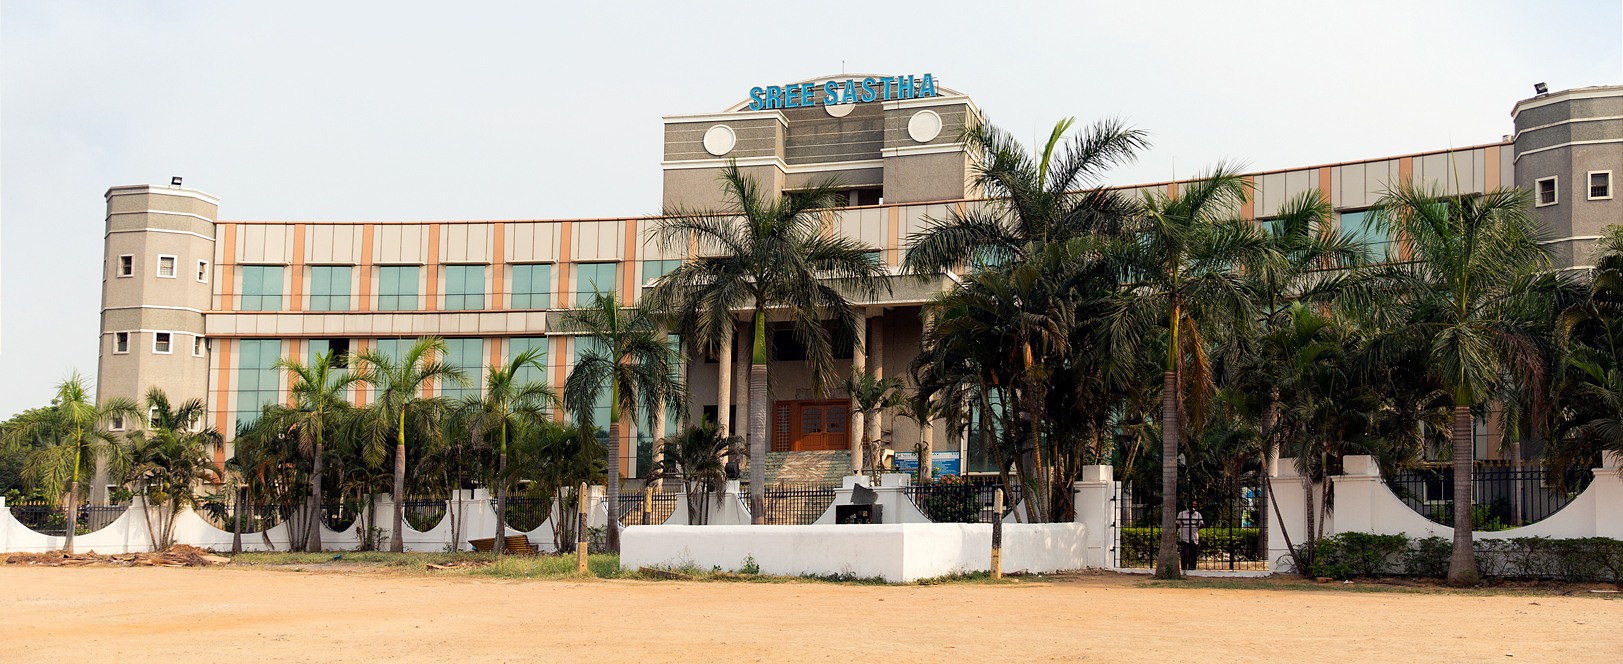 Sree Sastha Institute of Engineering And Technology